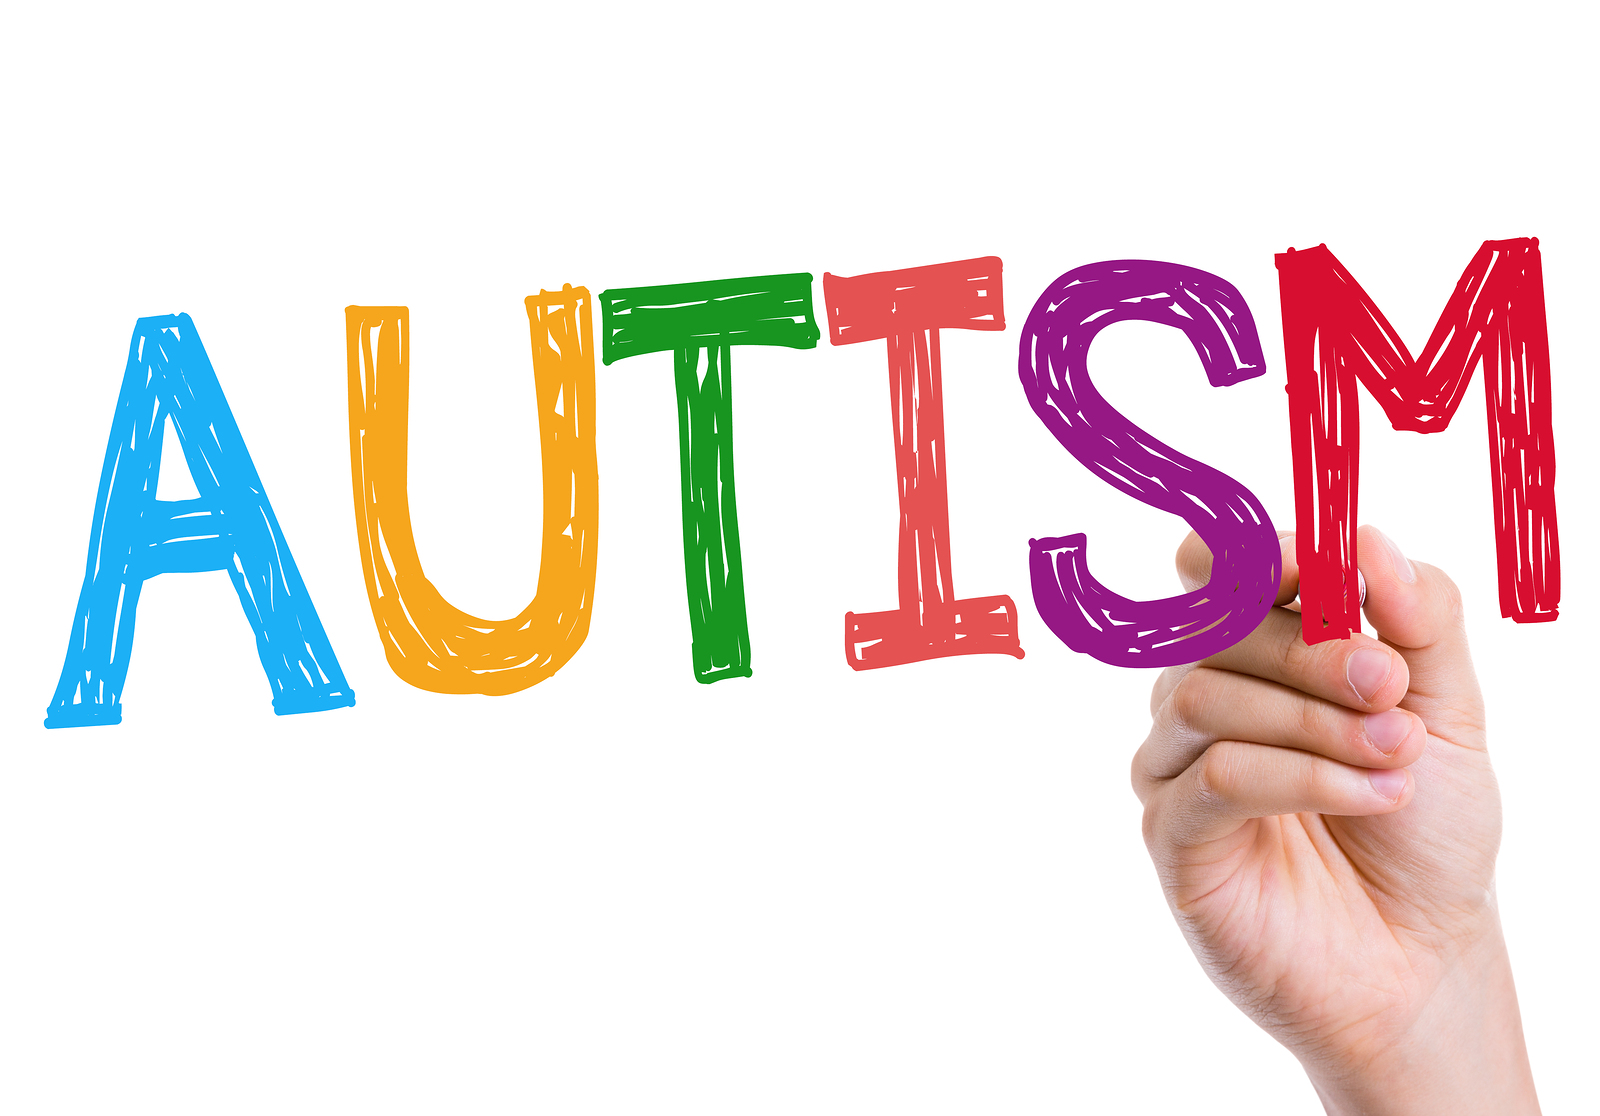 Why employing people on the autism spectrum benefits everyone